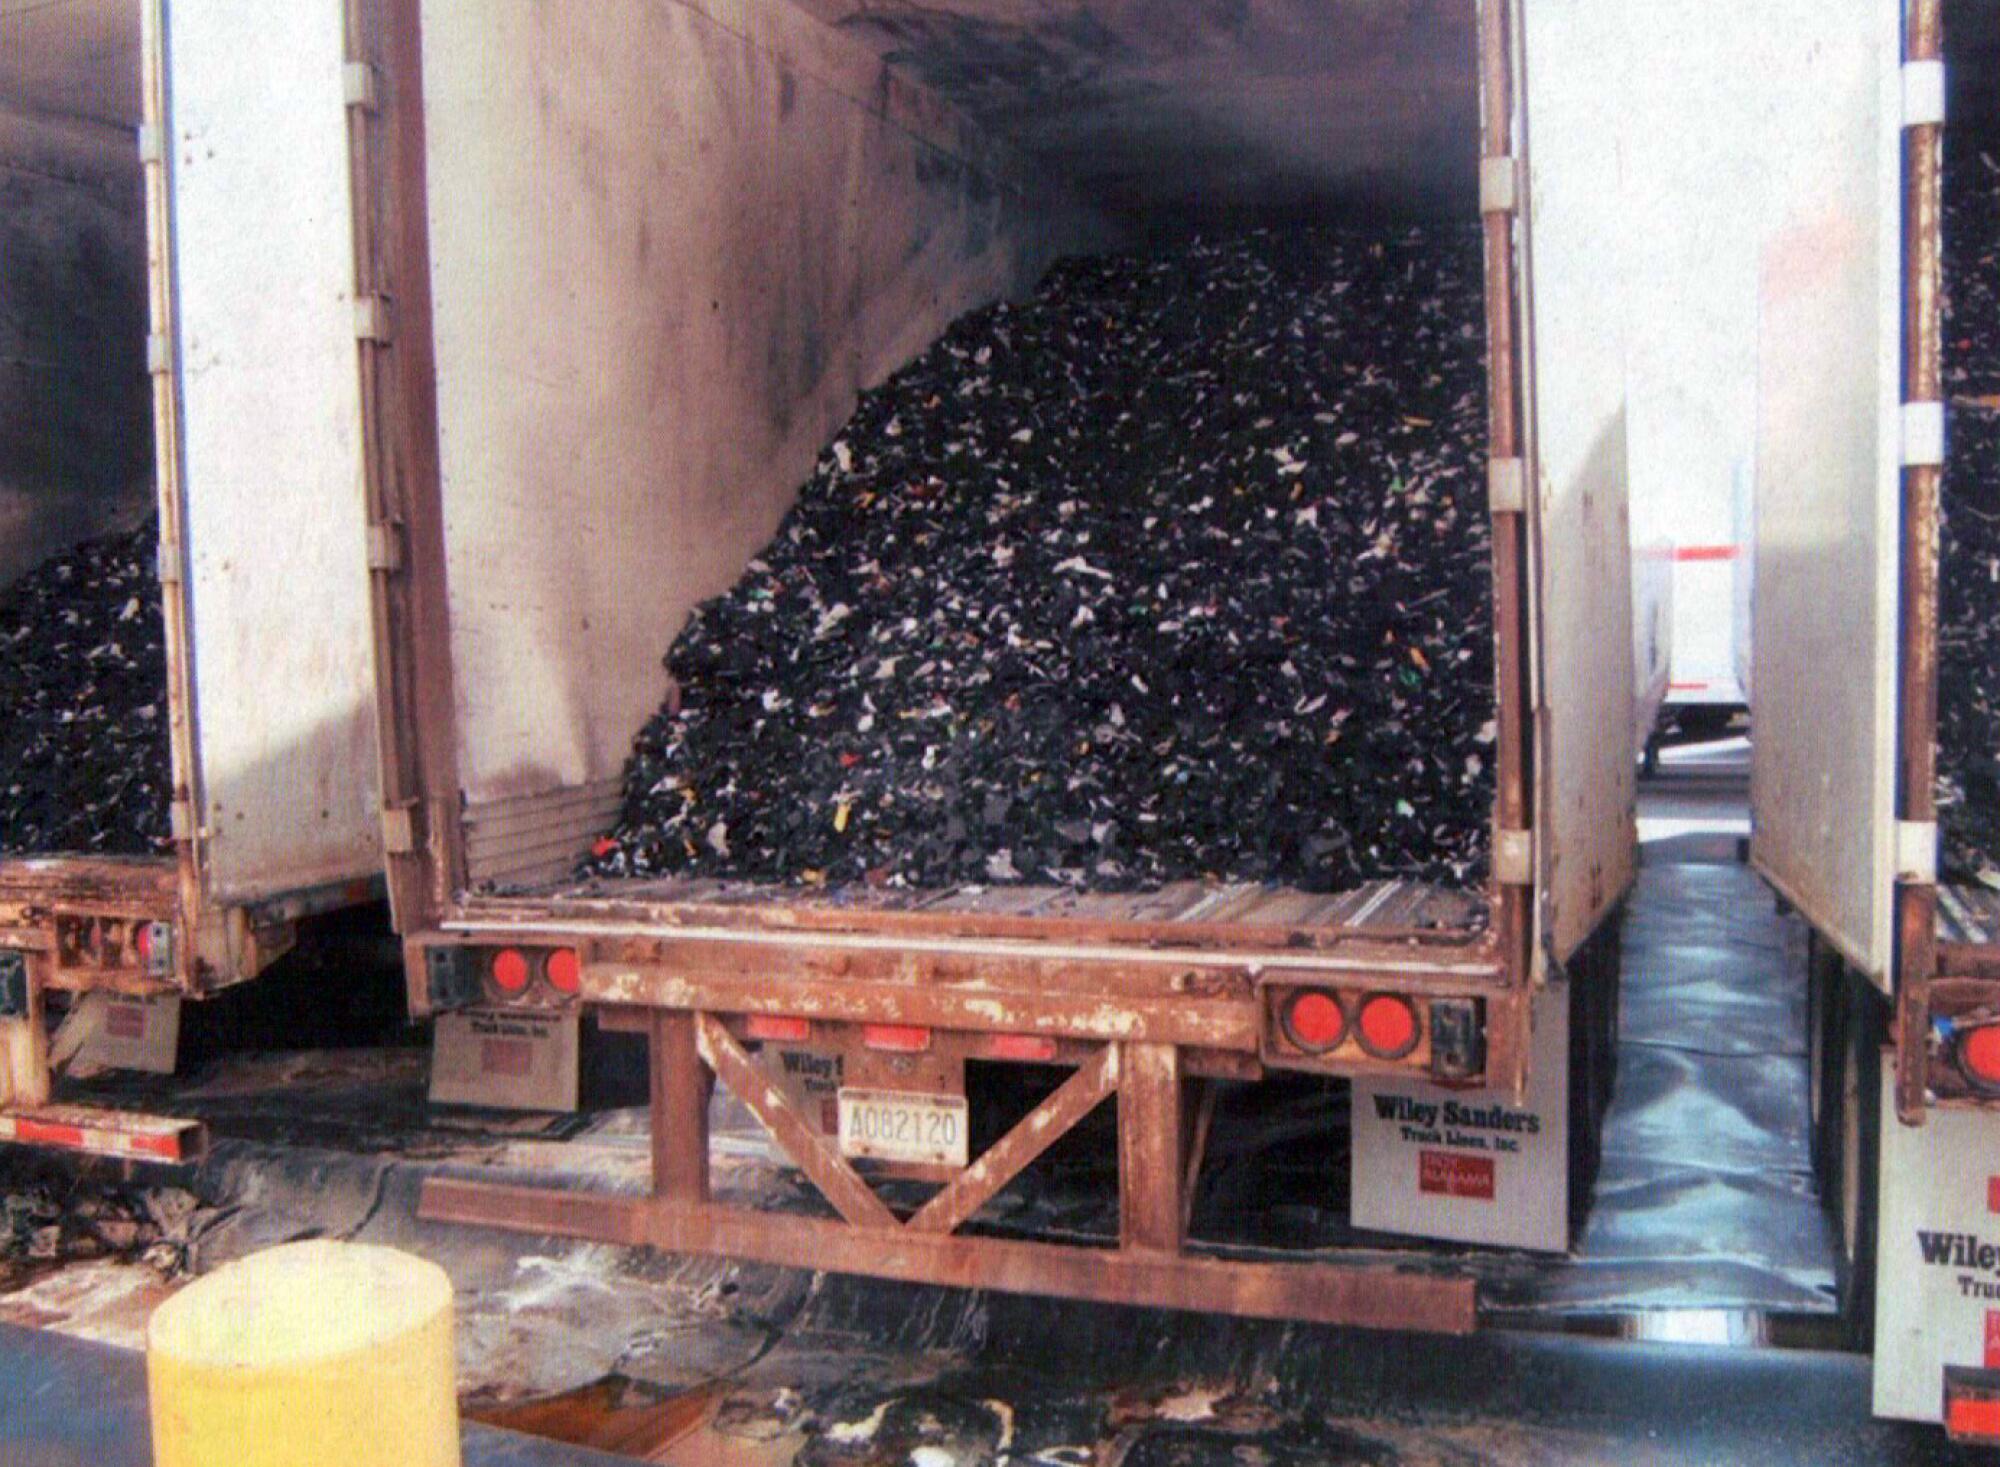 A truck trailer is filled with a dark material.